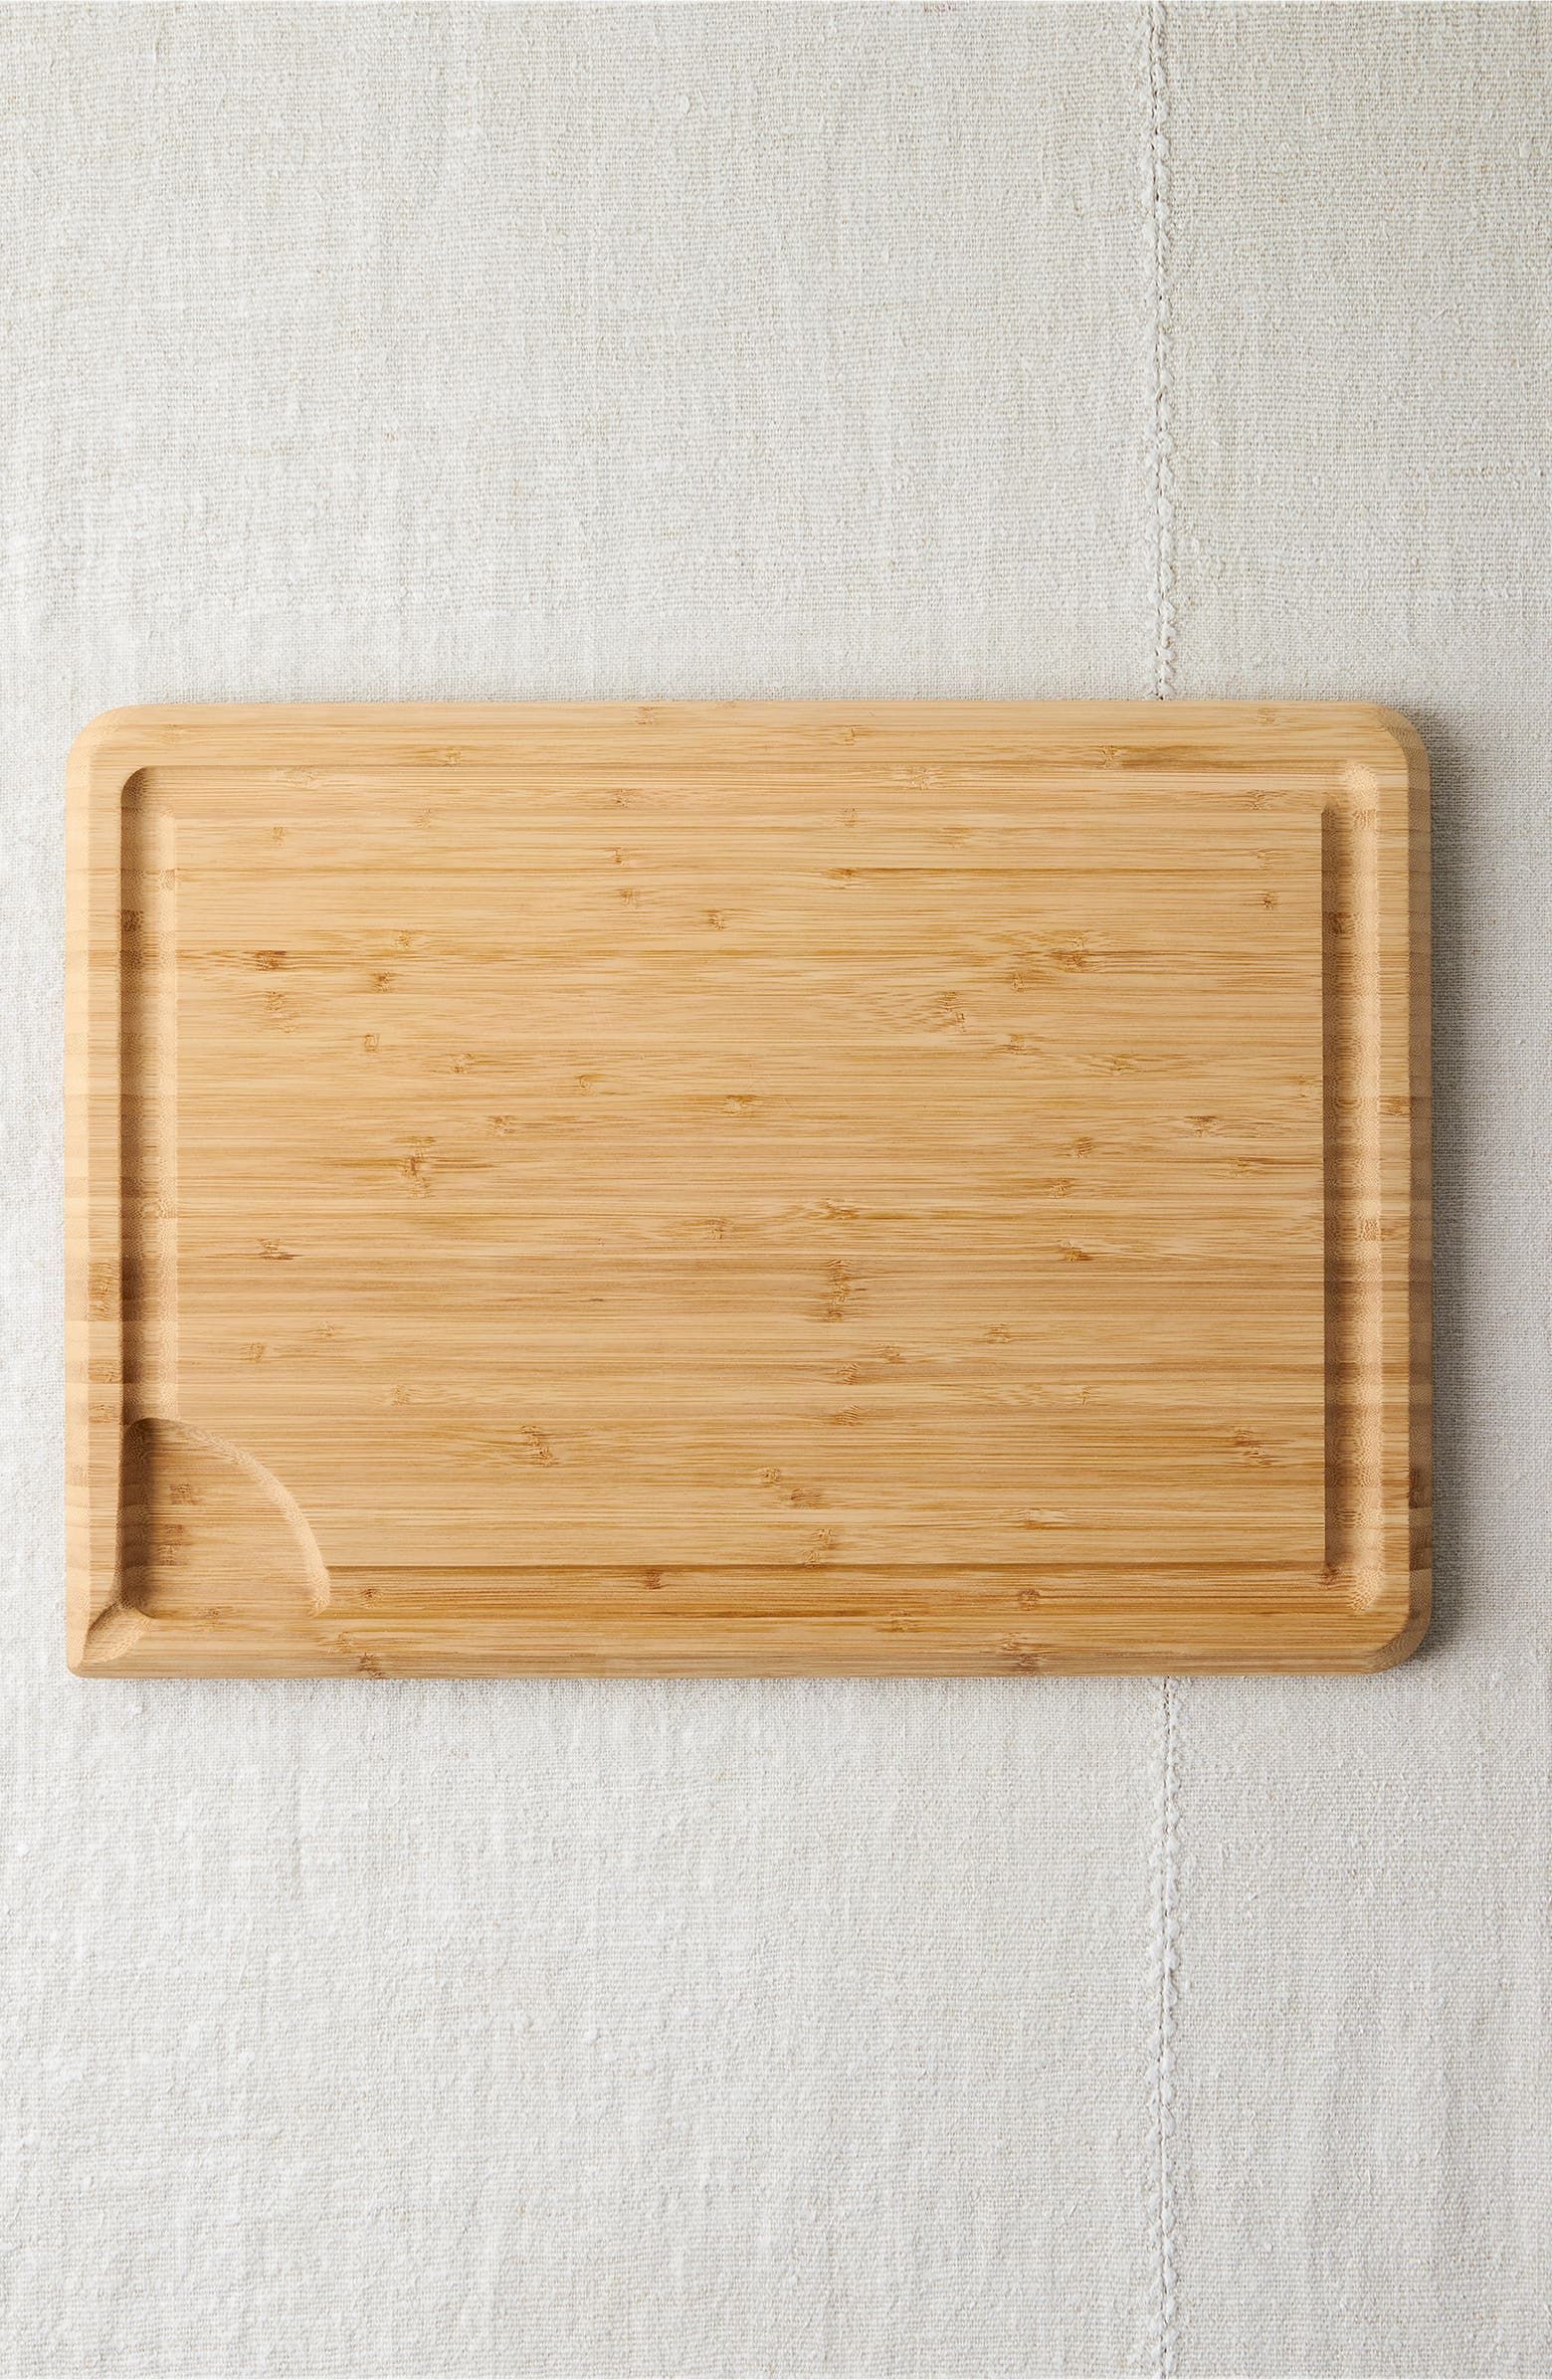 Five Two by Food52 Bamboo Cutting Board